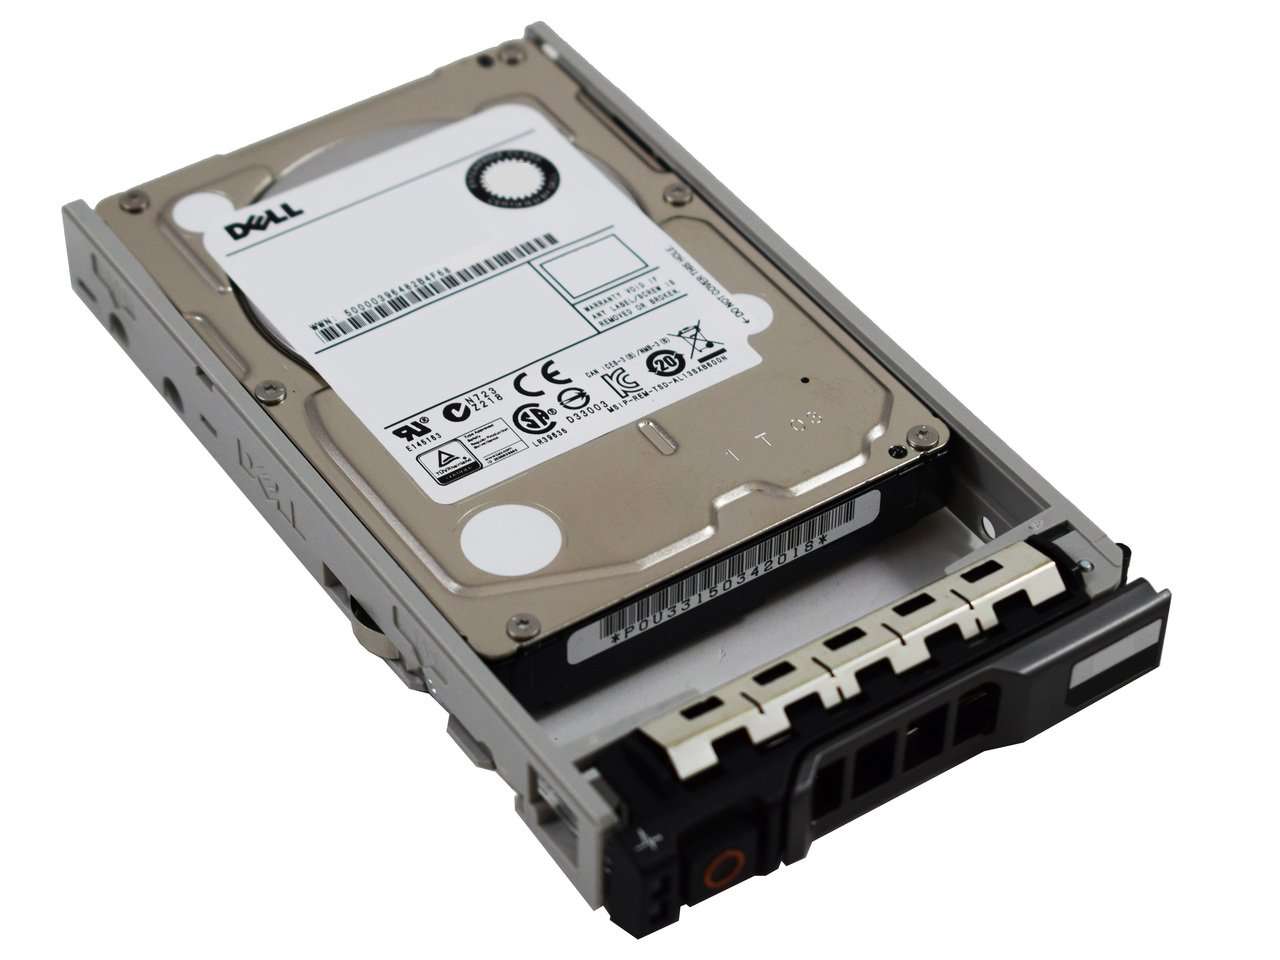 Dell G13 400-AGRW 600GB 15K RPM SAS 6Gb/s 512n 2.5" Manufacturer Recertified HDD